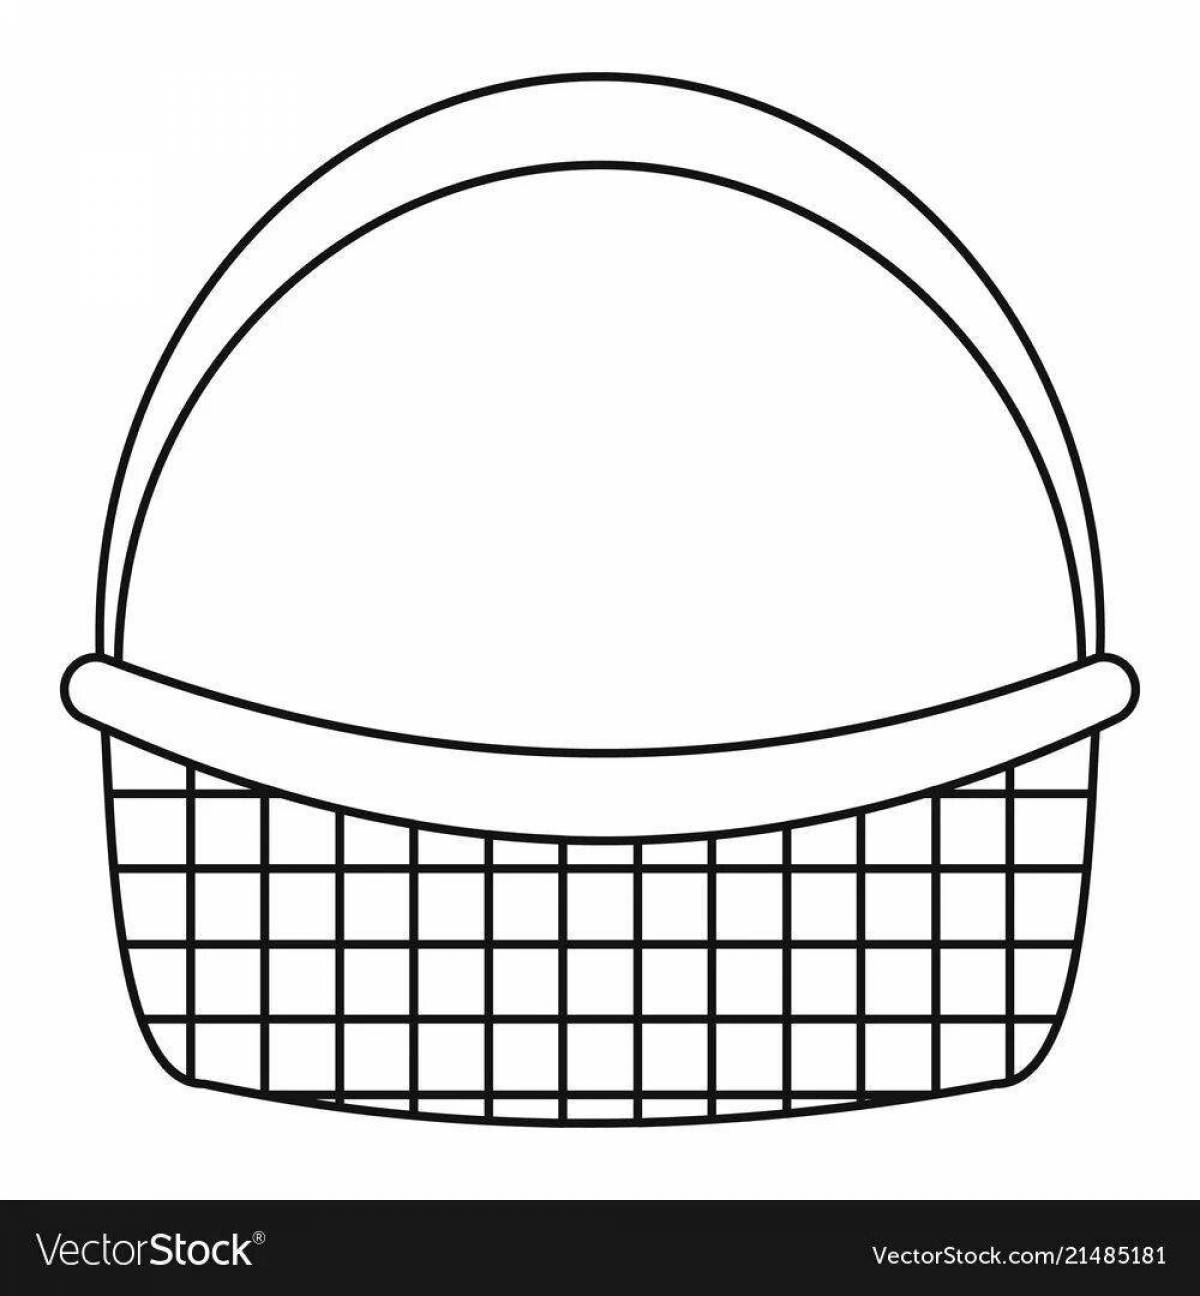 Coloring for children's bright empty basket